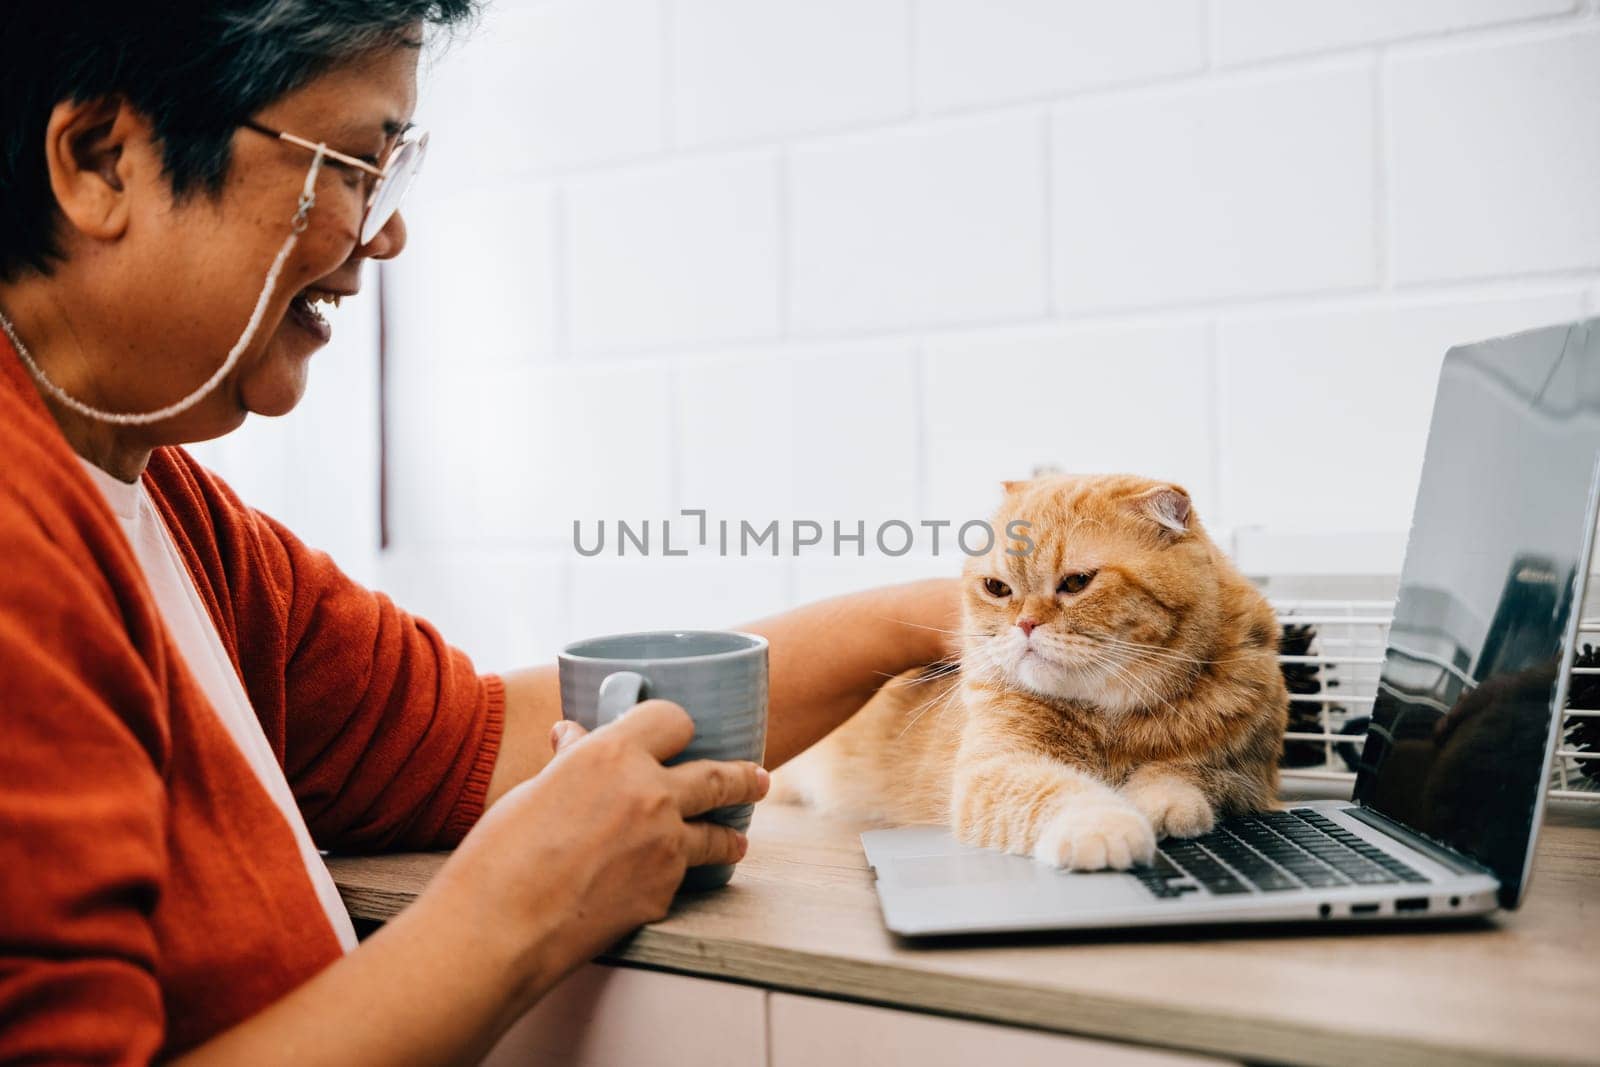 Senior woman, in her retirement, engages in online activities on her laptop, typing on the keyboard with a smile. Her cute Scottish Fold cat sits beside her, portrait of togetherness and contentment.